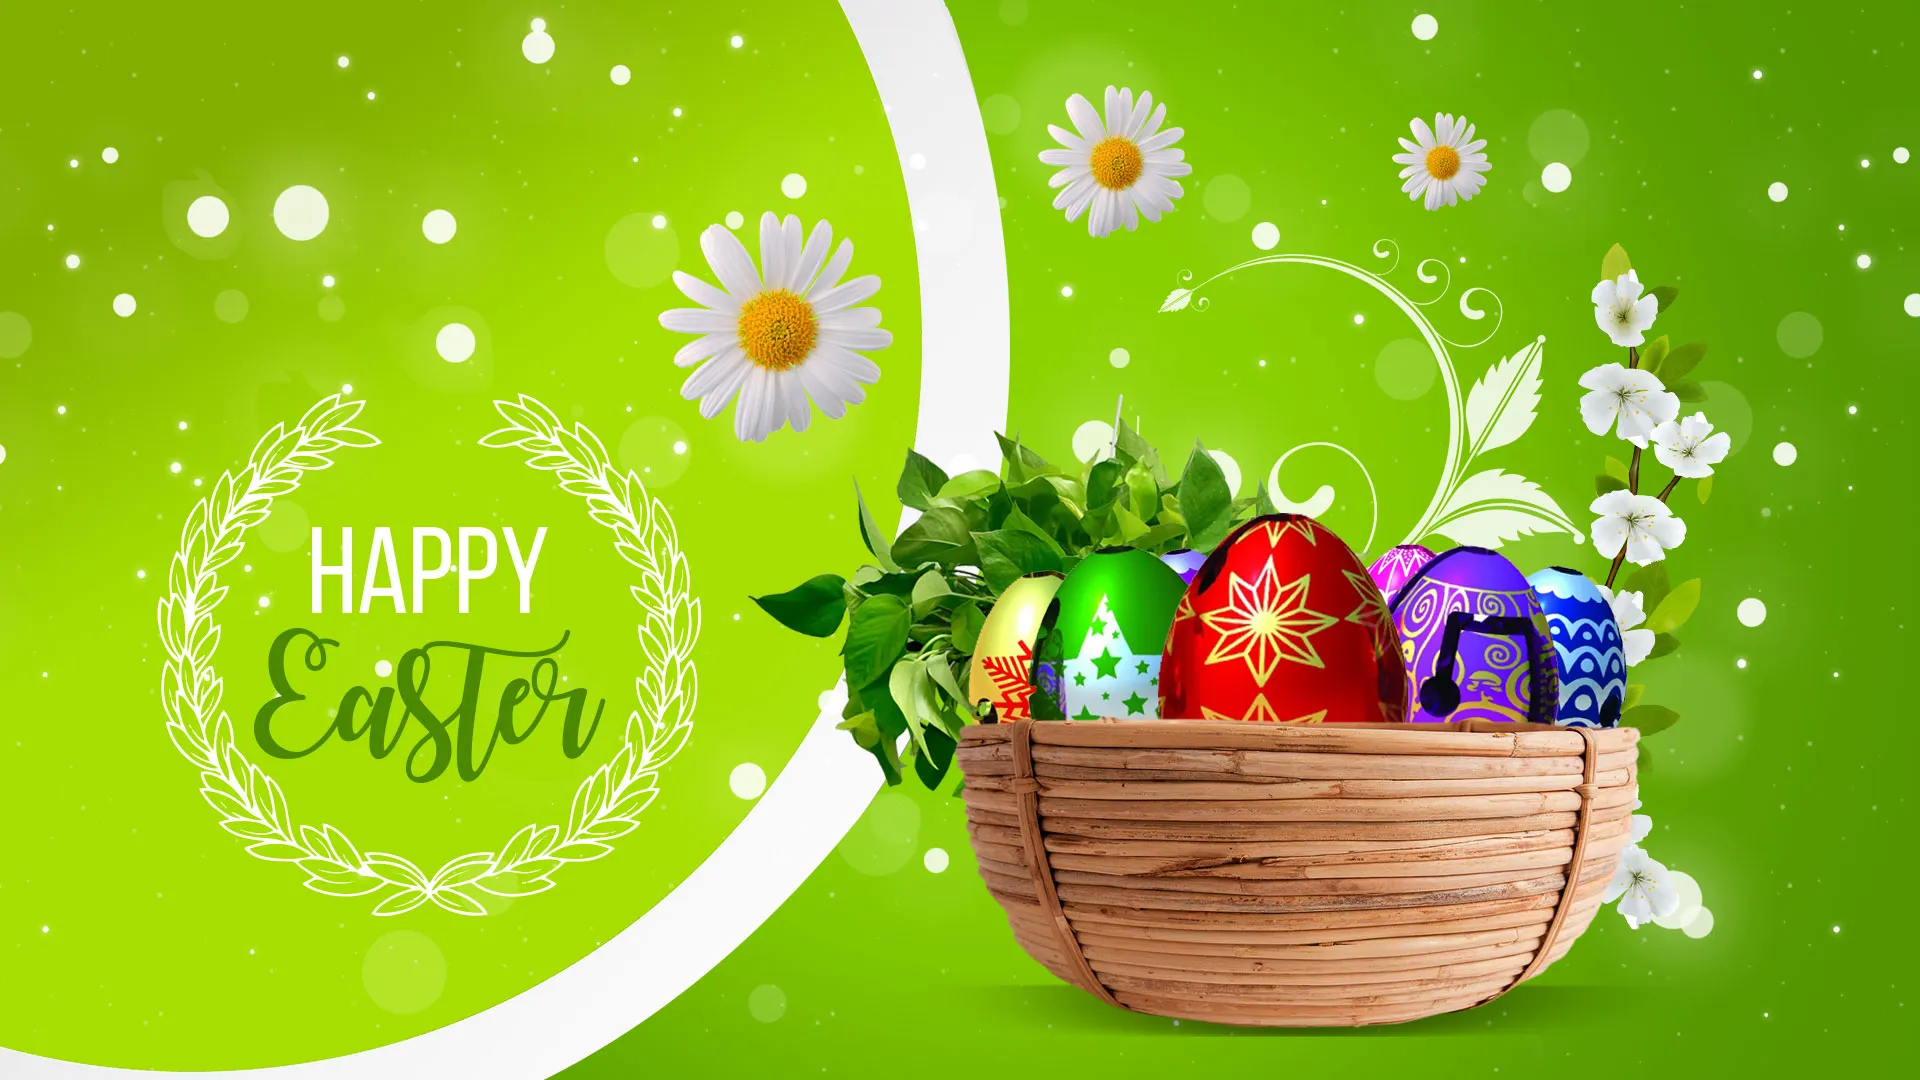 Blessed Easter Greetings